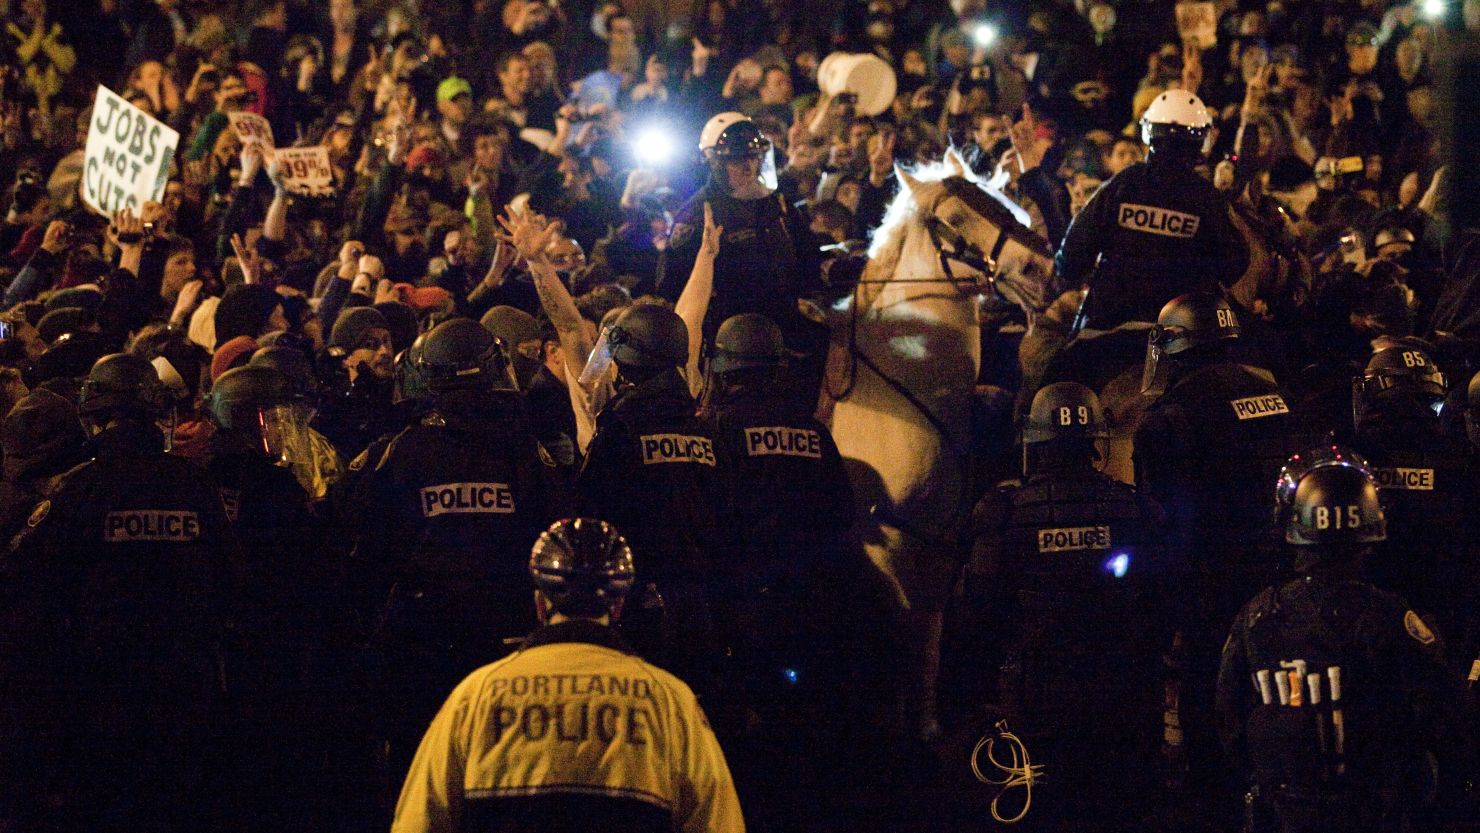 Police attempt to disperse a crowd at Occupy Portland on Sunday.